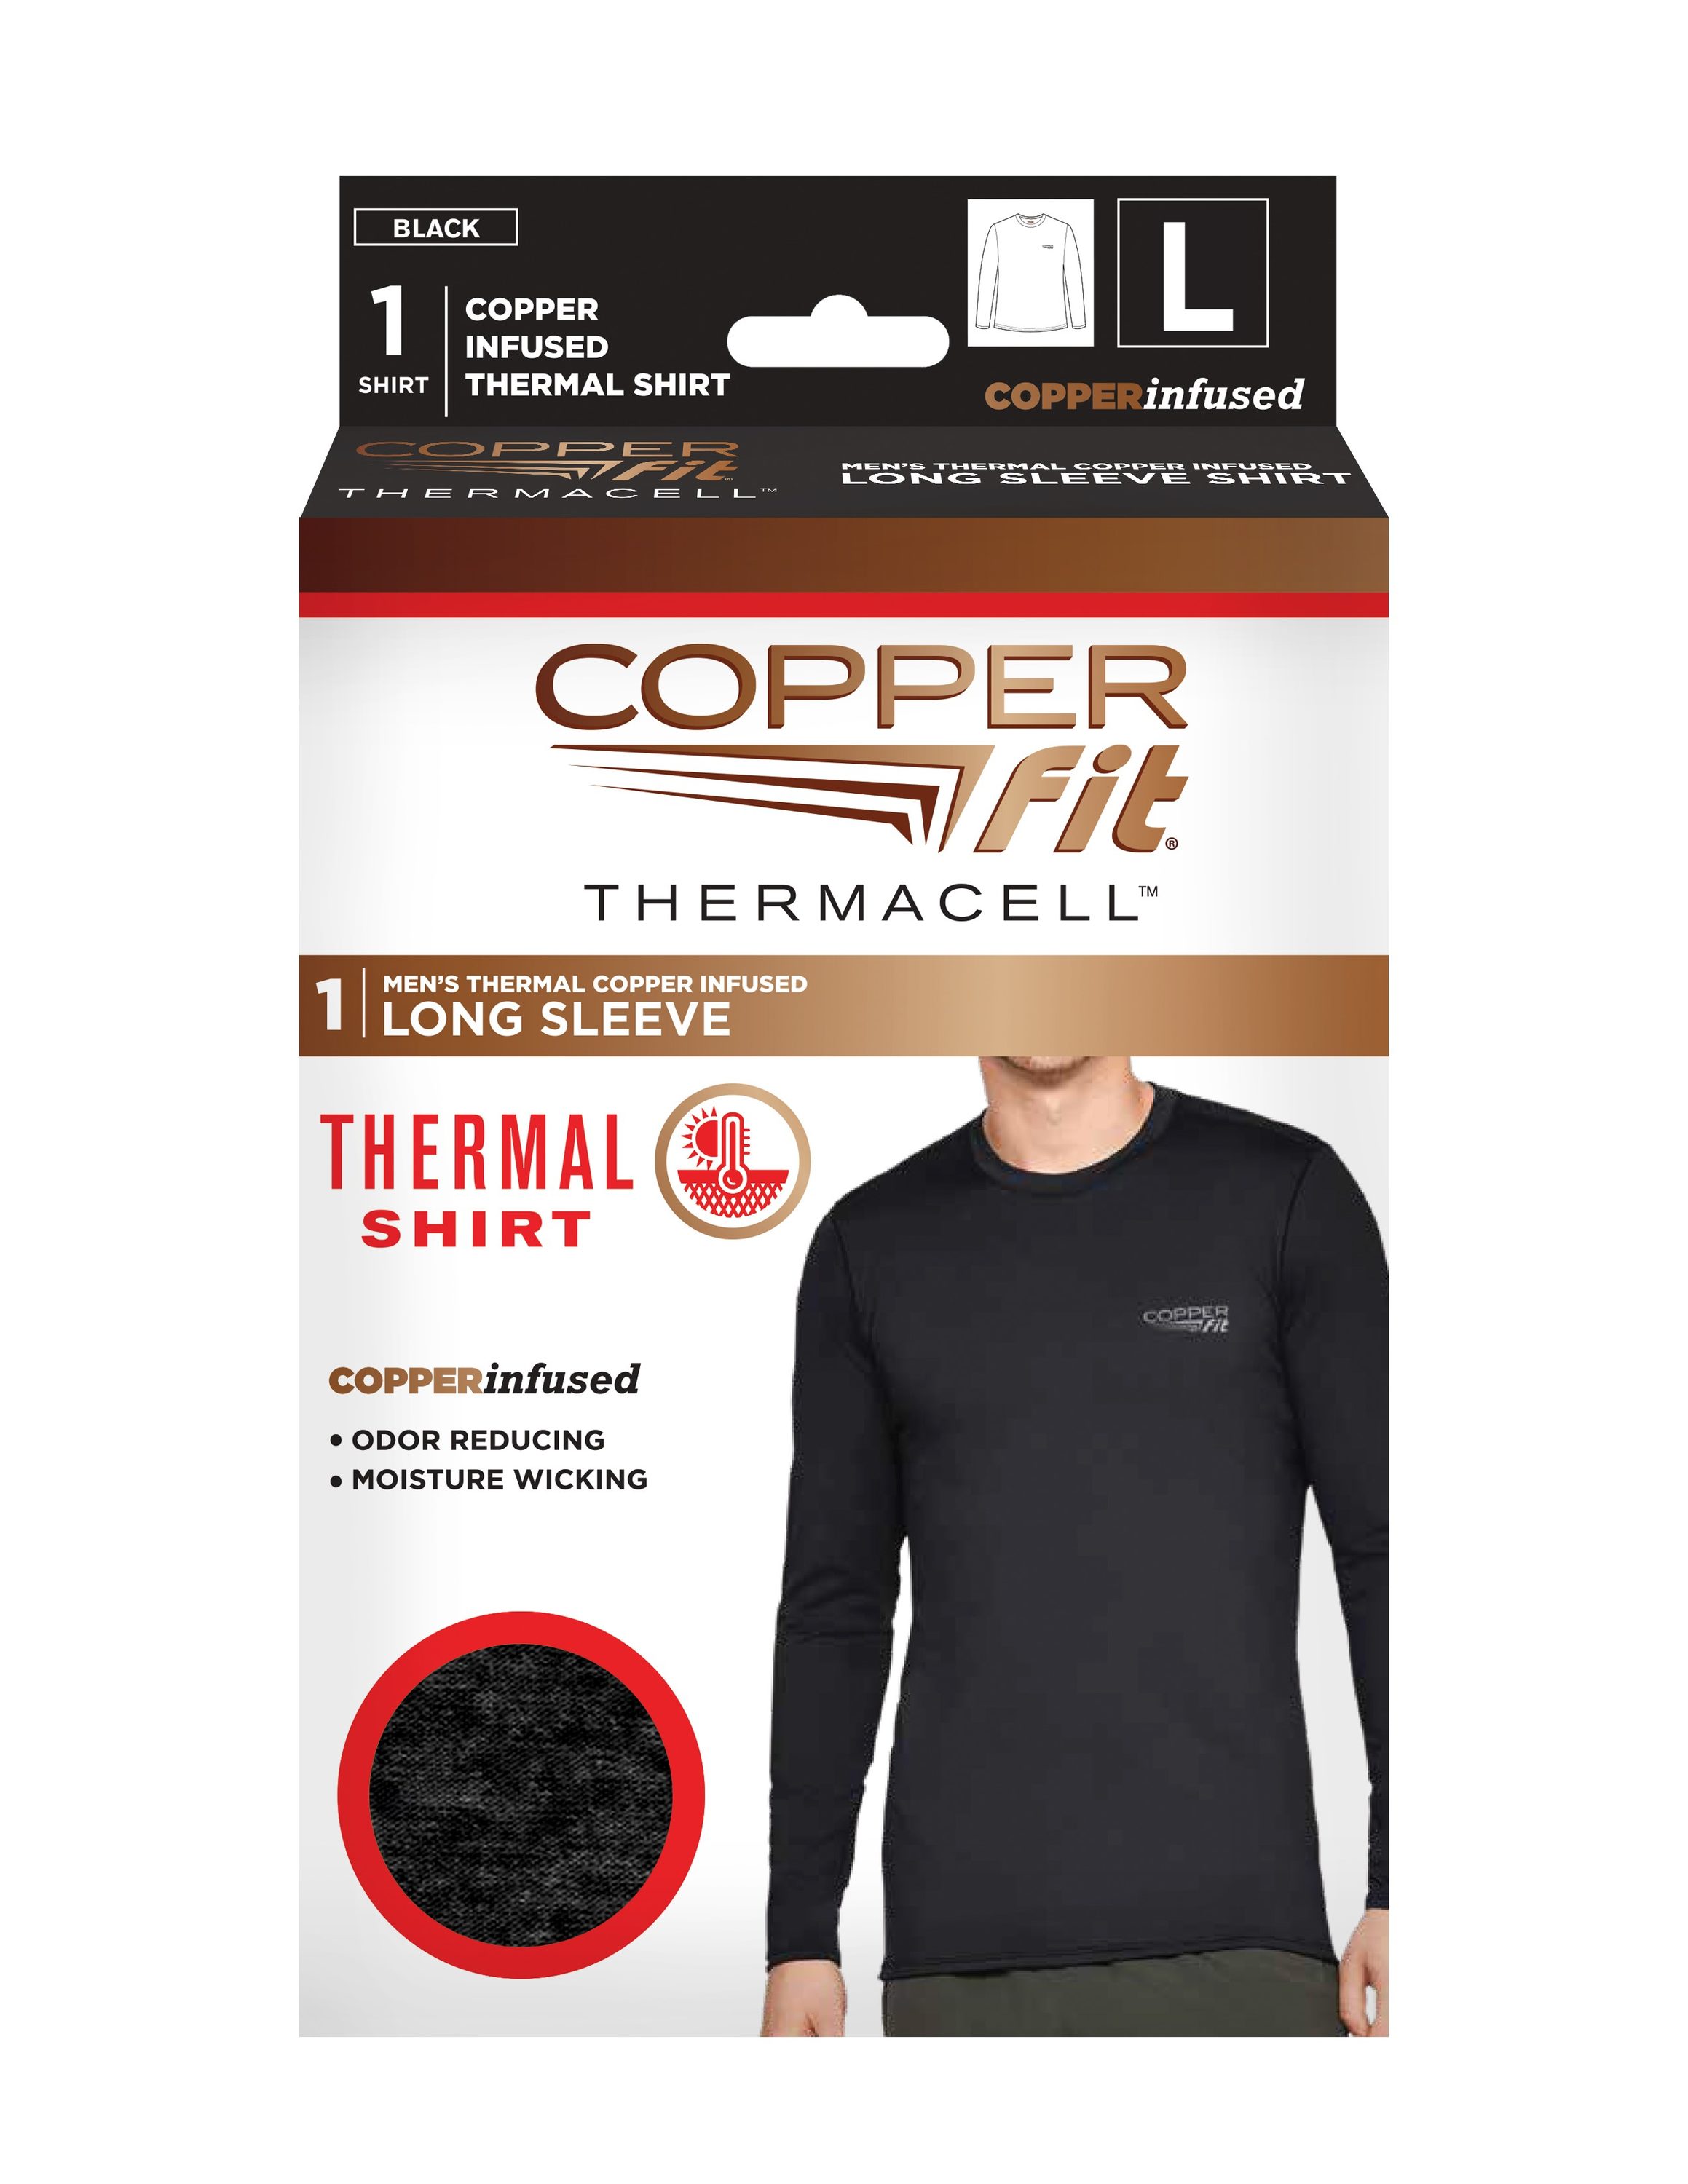 Thermal long sleeve - Thermal underwear - Body protection - Safety products